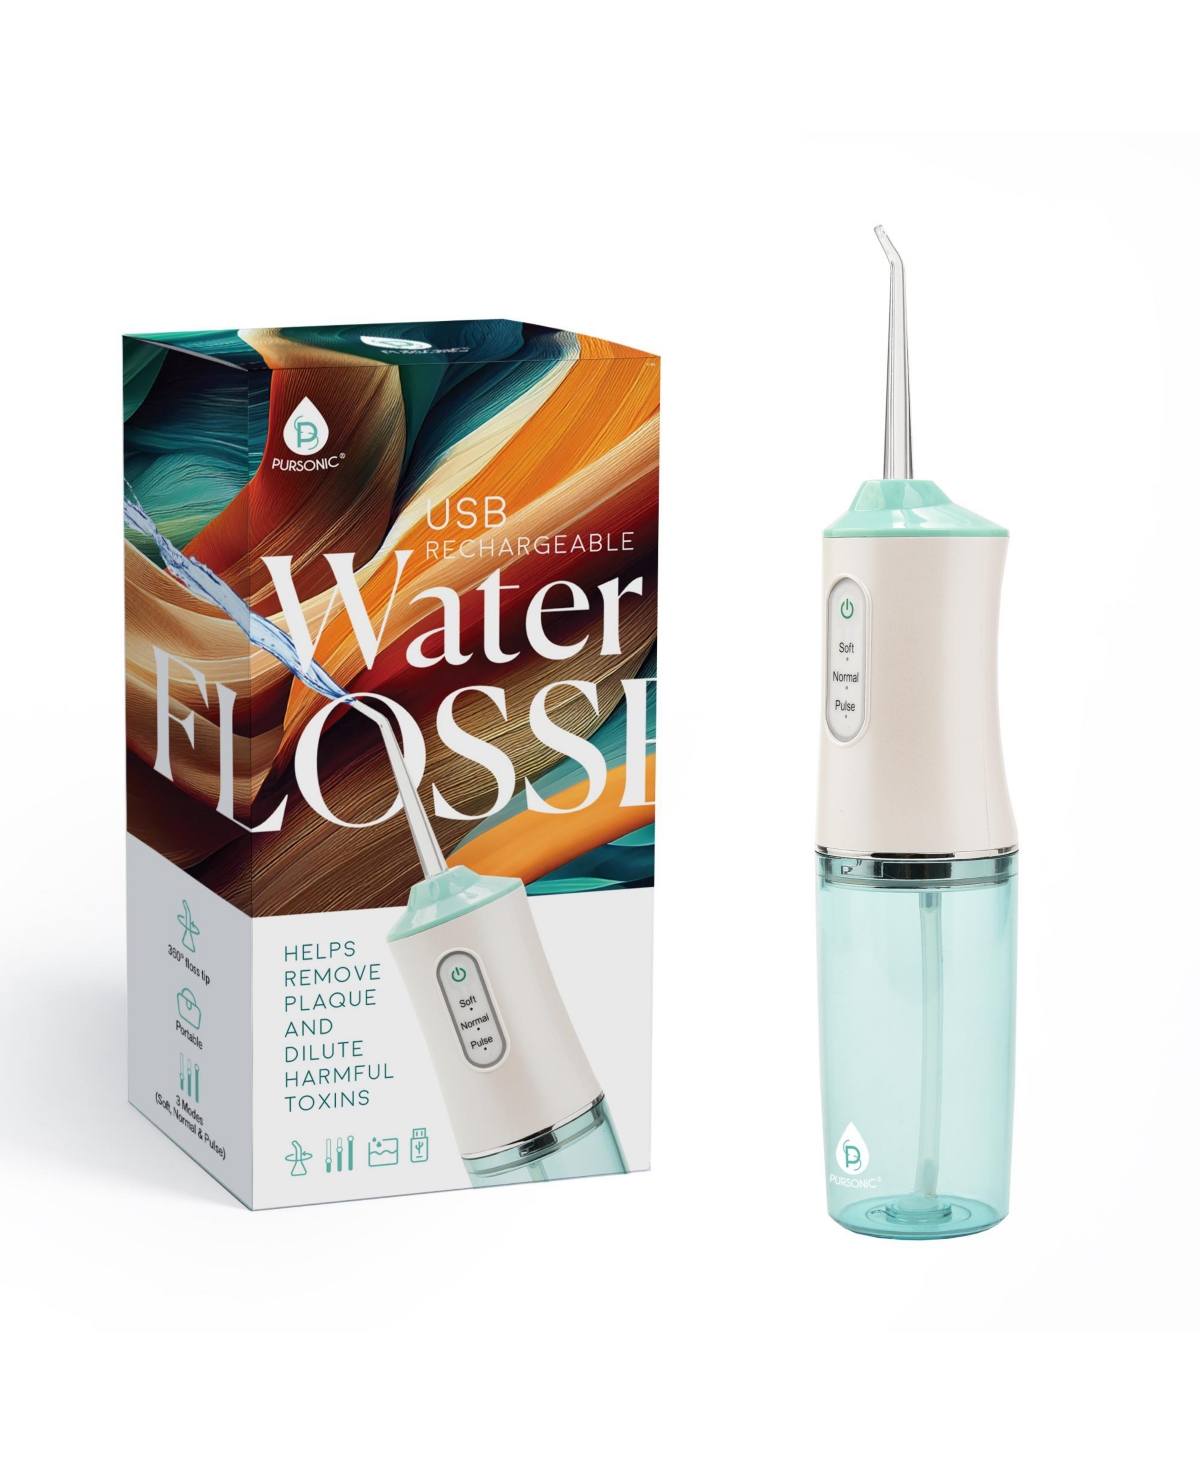 PURSONIC USB RECHARGEABLE ORAL IRRIGATOR WATER FLOSSER